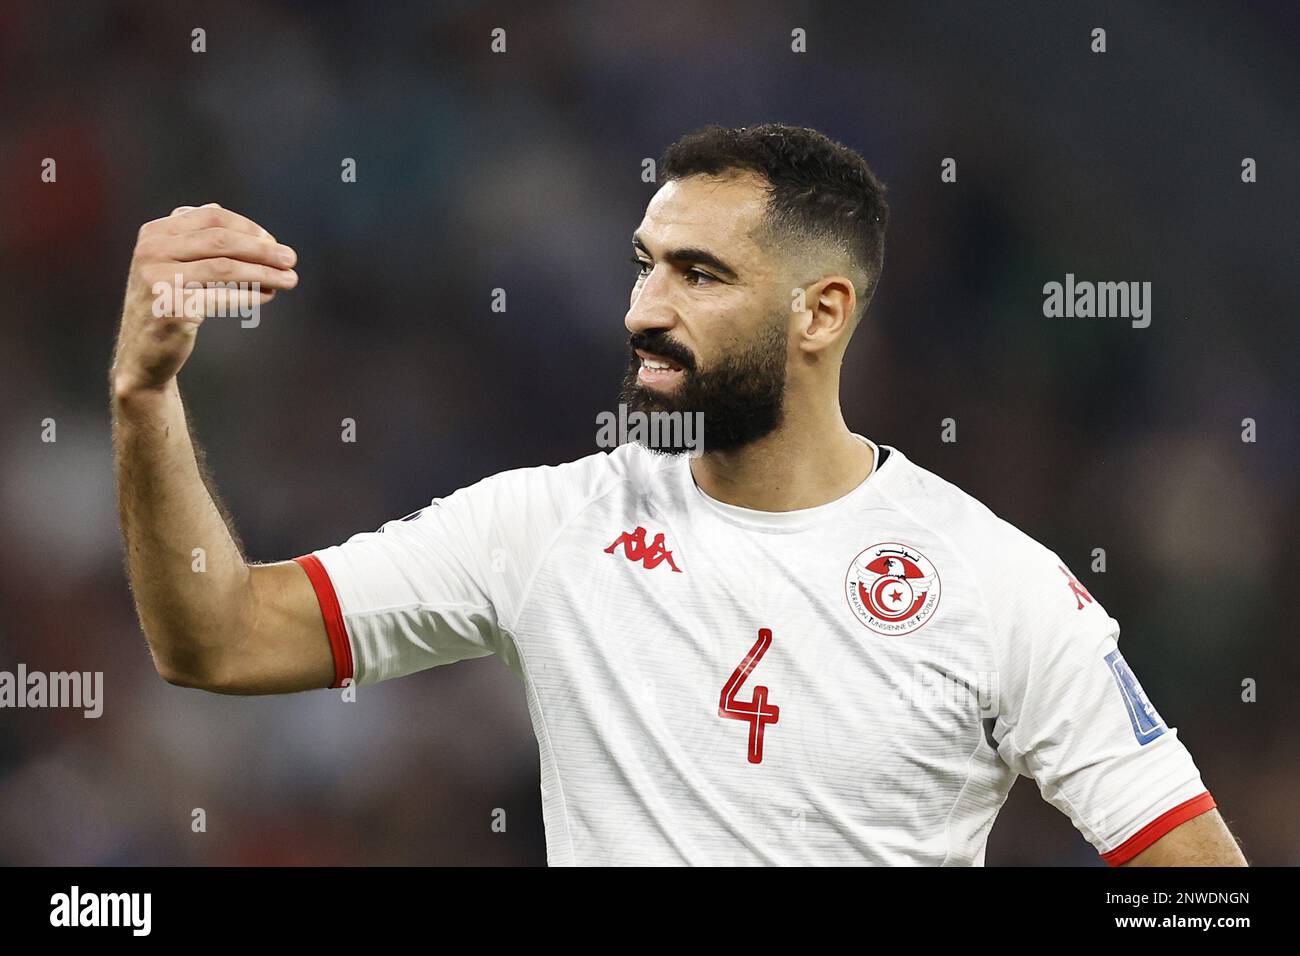 DOHA - Yassine Meriah of Tunisia during the FIFA World Cup Qatar 2022 group C match between Tunisia and France at Education City Stadium on November 30, 2022 in Doha, Qatar. AP | Dutch Height | MAURICE OF STONE Stock Photo